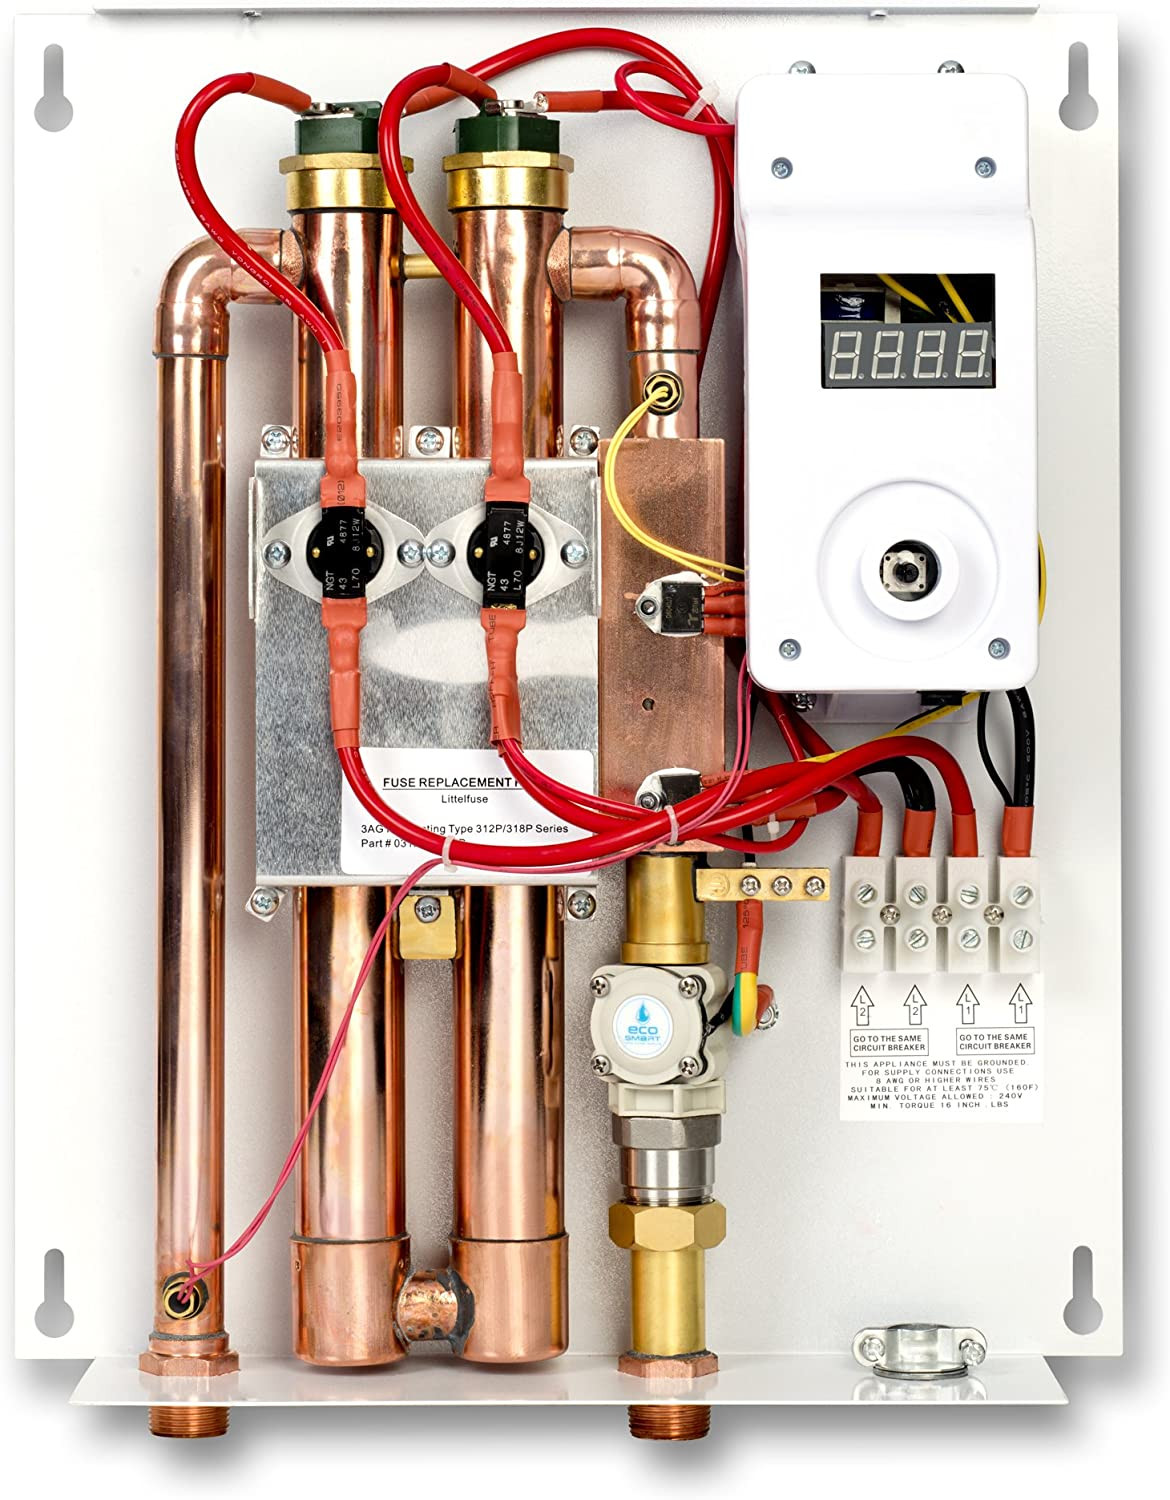 MQ3CSO ecosmart eco 18 electric tankless water heater 18 kw at 240 volts with patented self modulating tech